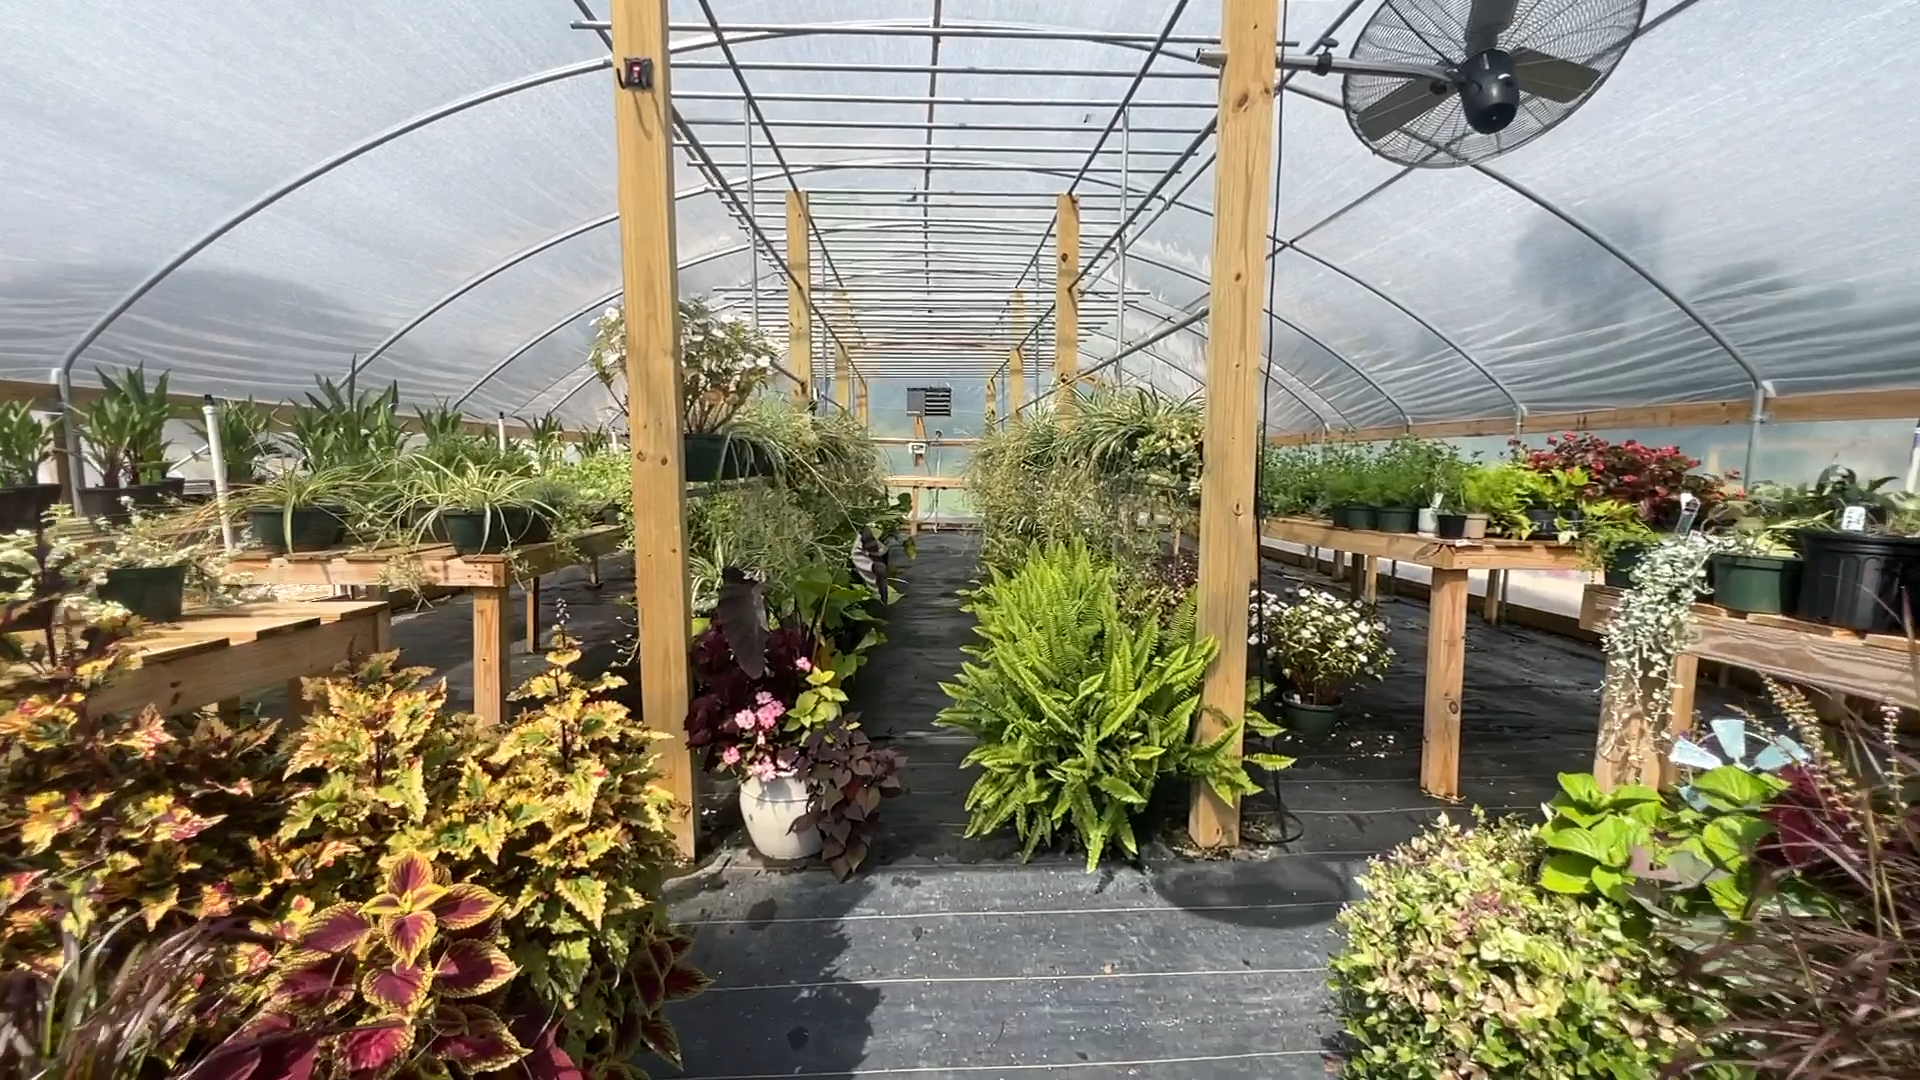 Greenhouse, Garden, and Landscaping Supplies – Knoxville Seed and Greenhouse  in Knoxville, TN